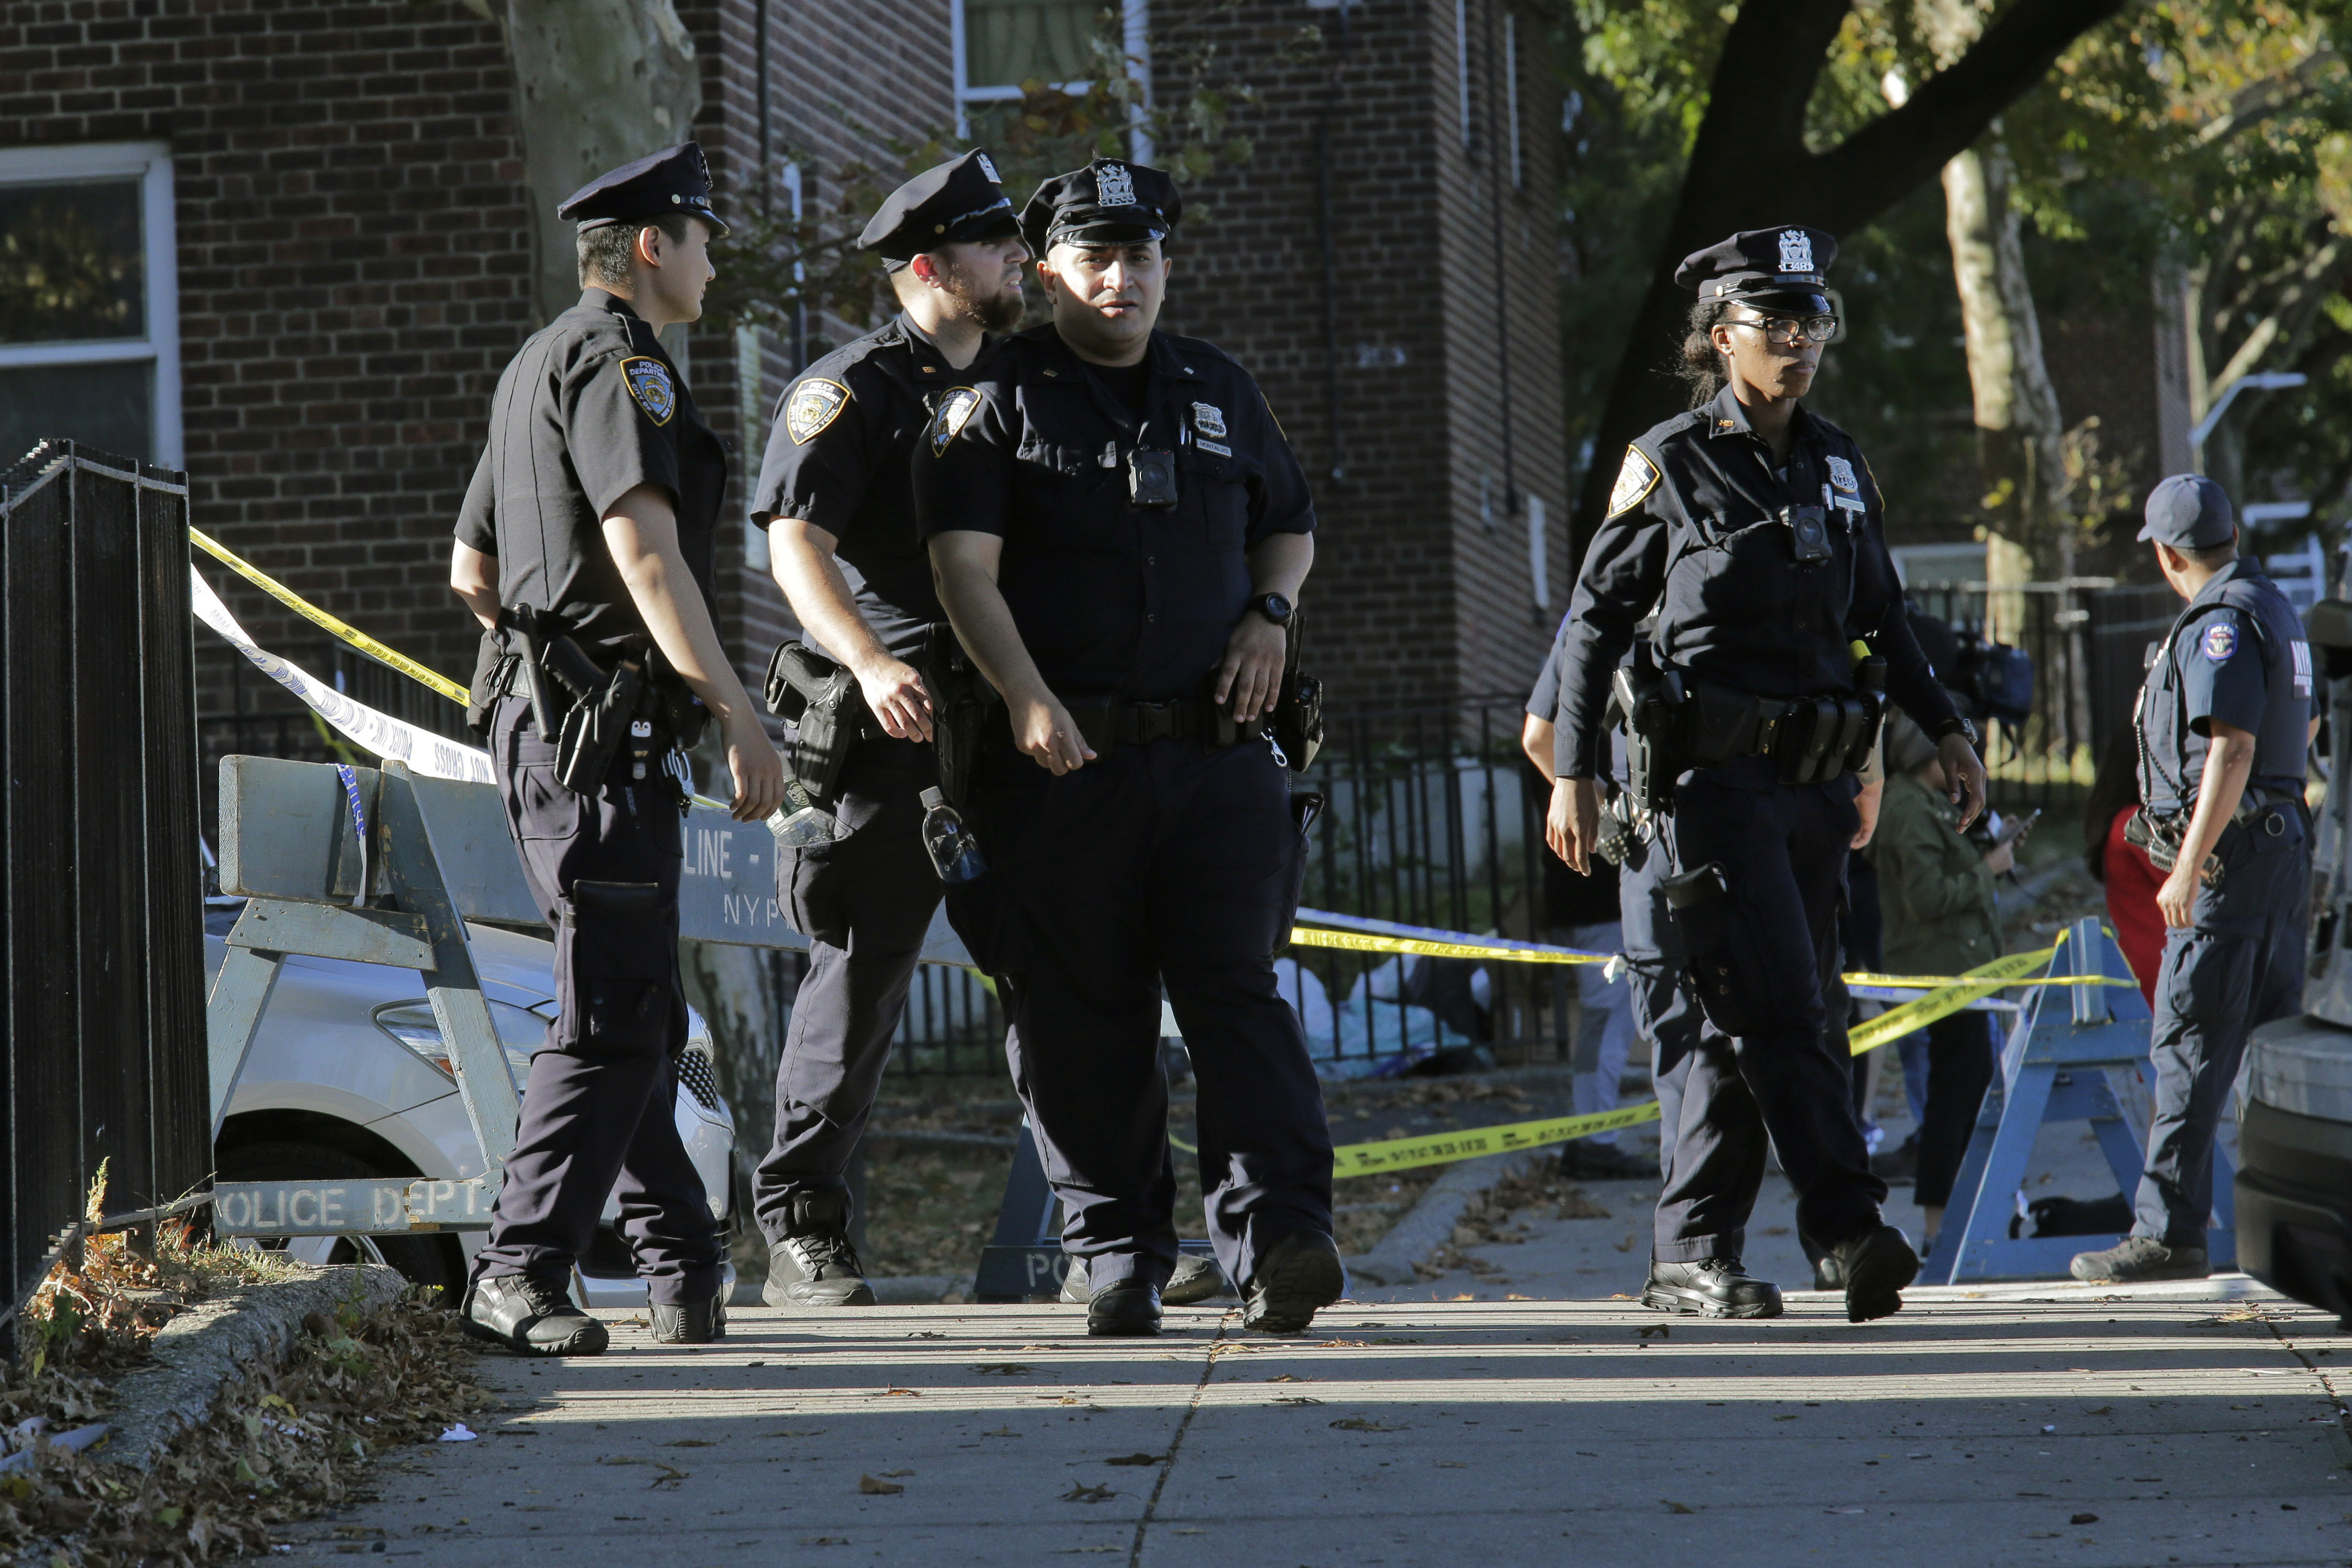 NEW YORK - A New York City police officer grappling with an armed man died ...